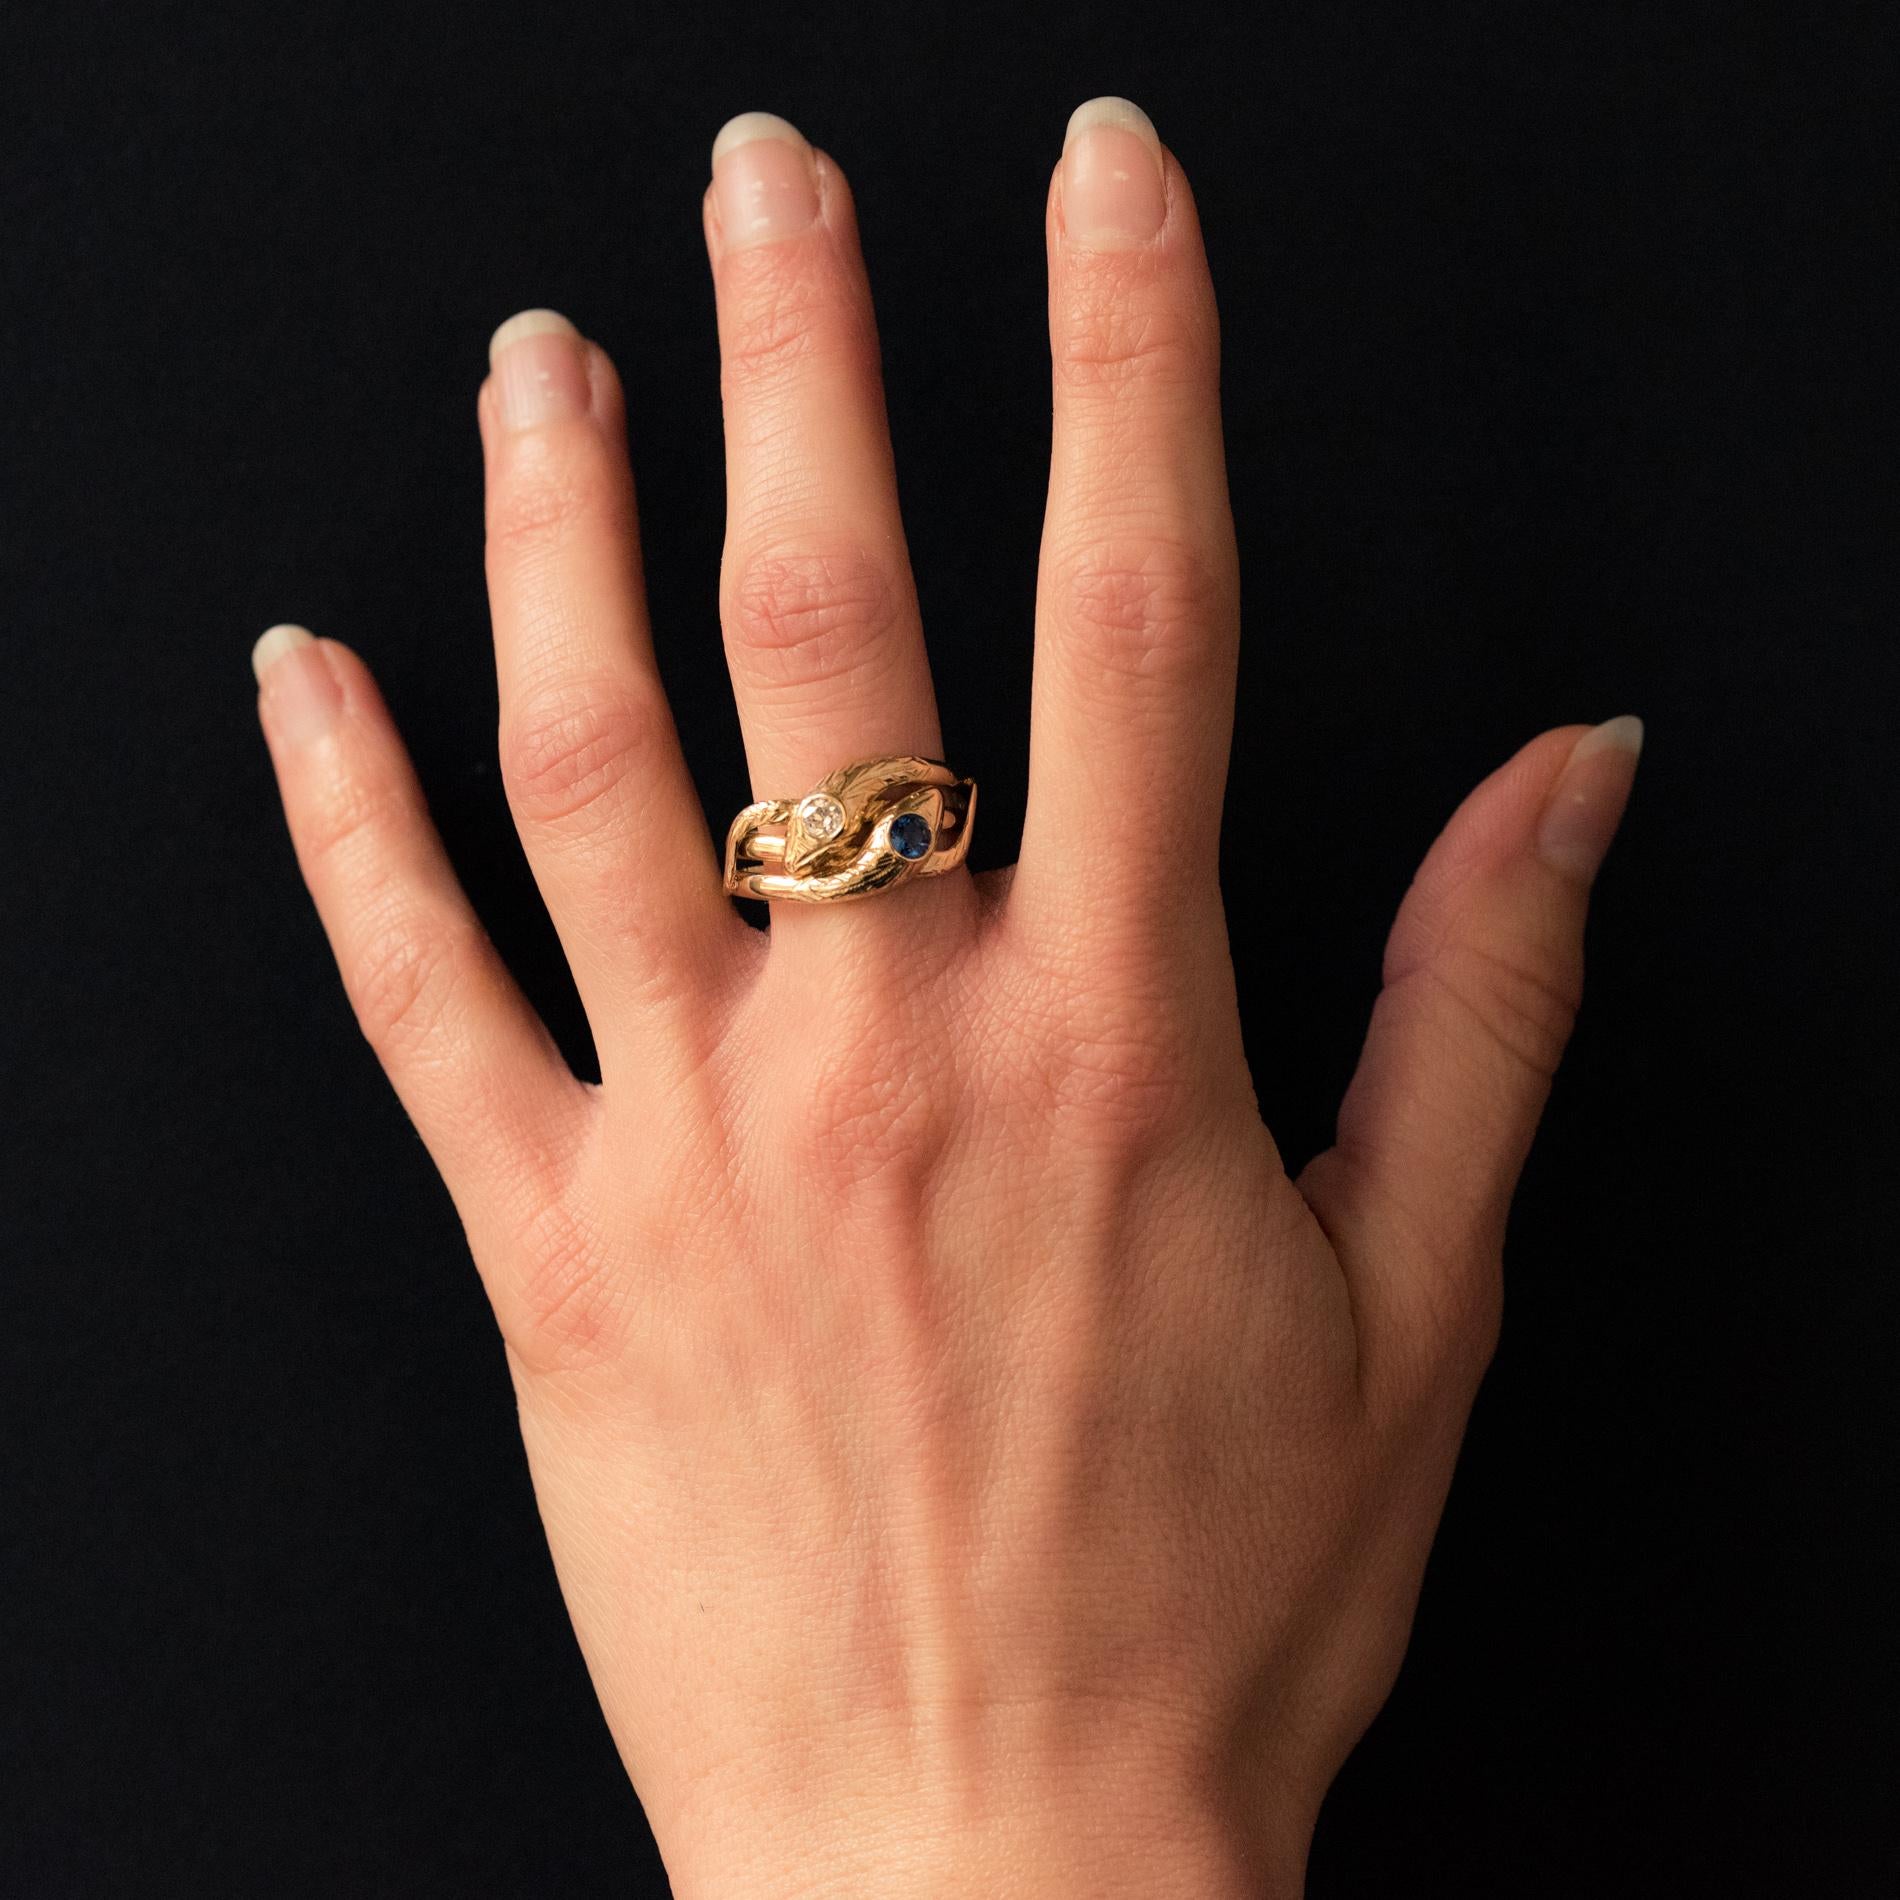 Ring in 18 karat yellow gold, eagle's head hallmark.
This superb antique ring represents 2 snakes coiled on themselves whose heads form the top of the ring. One is set with an antique brilliant- cut diamond, the other is set with a blue